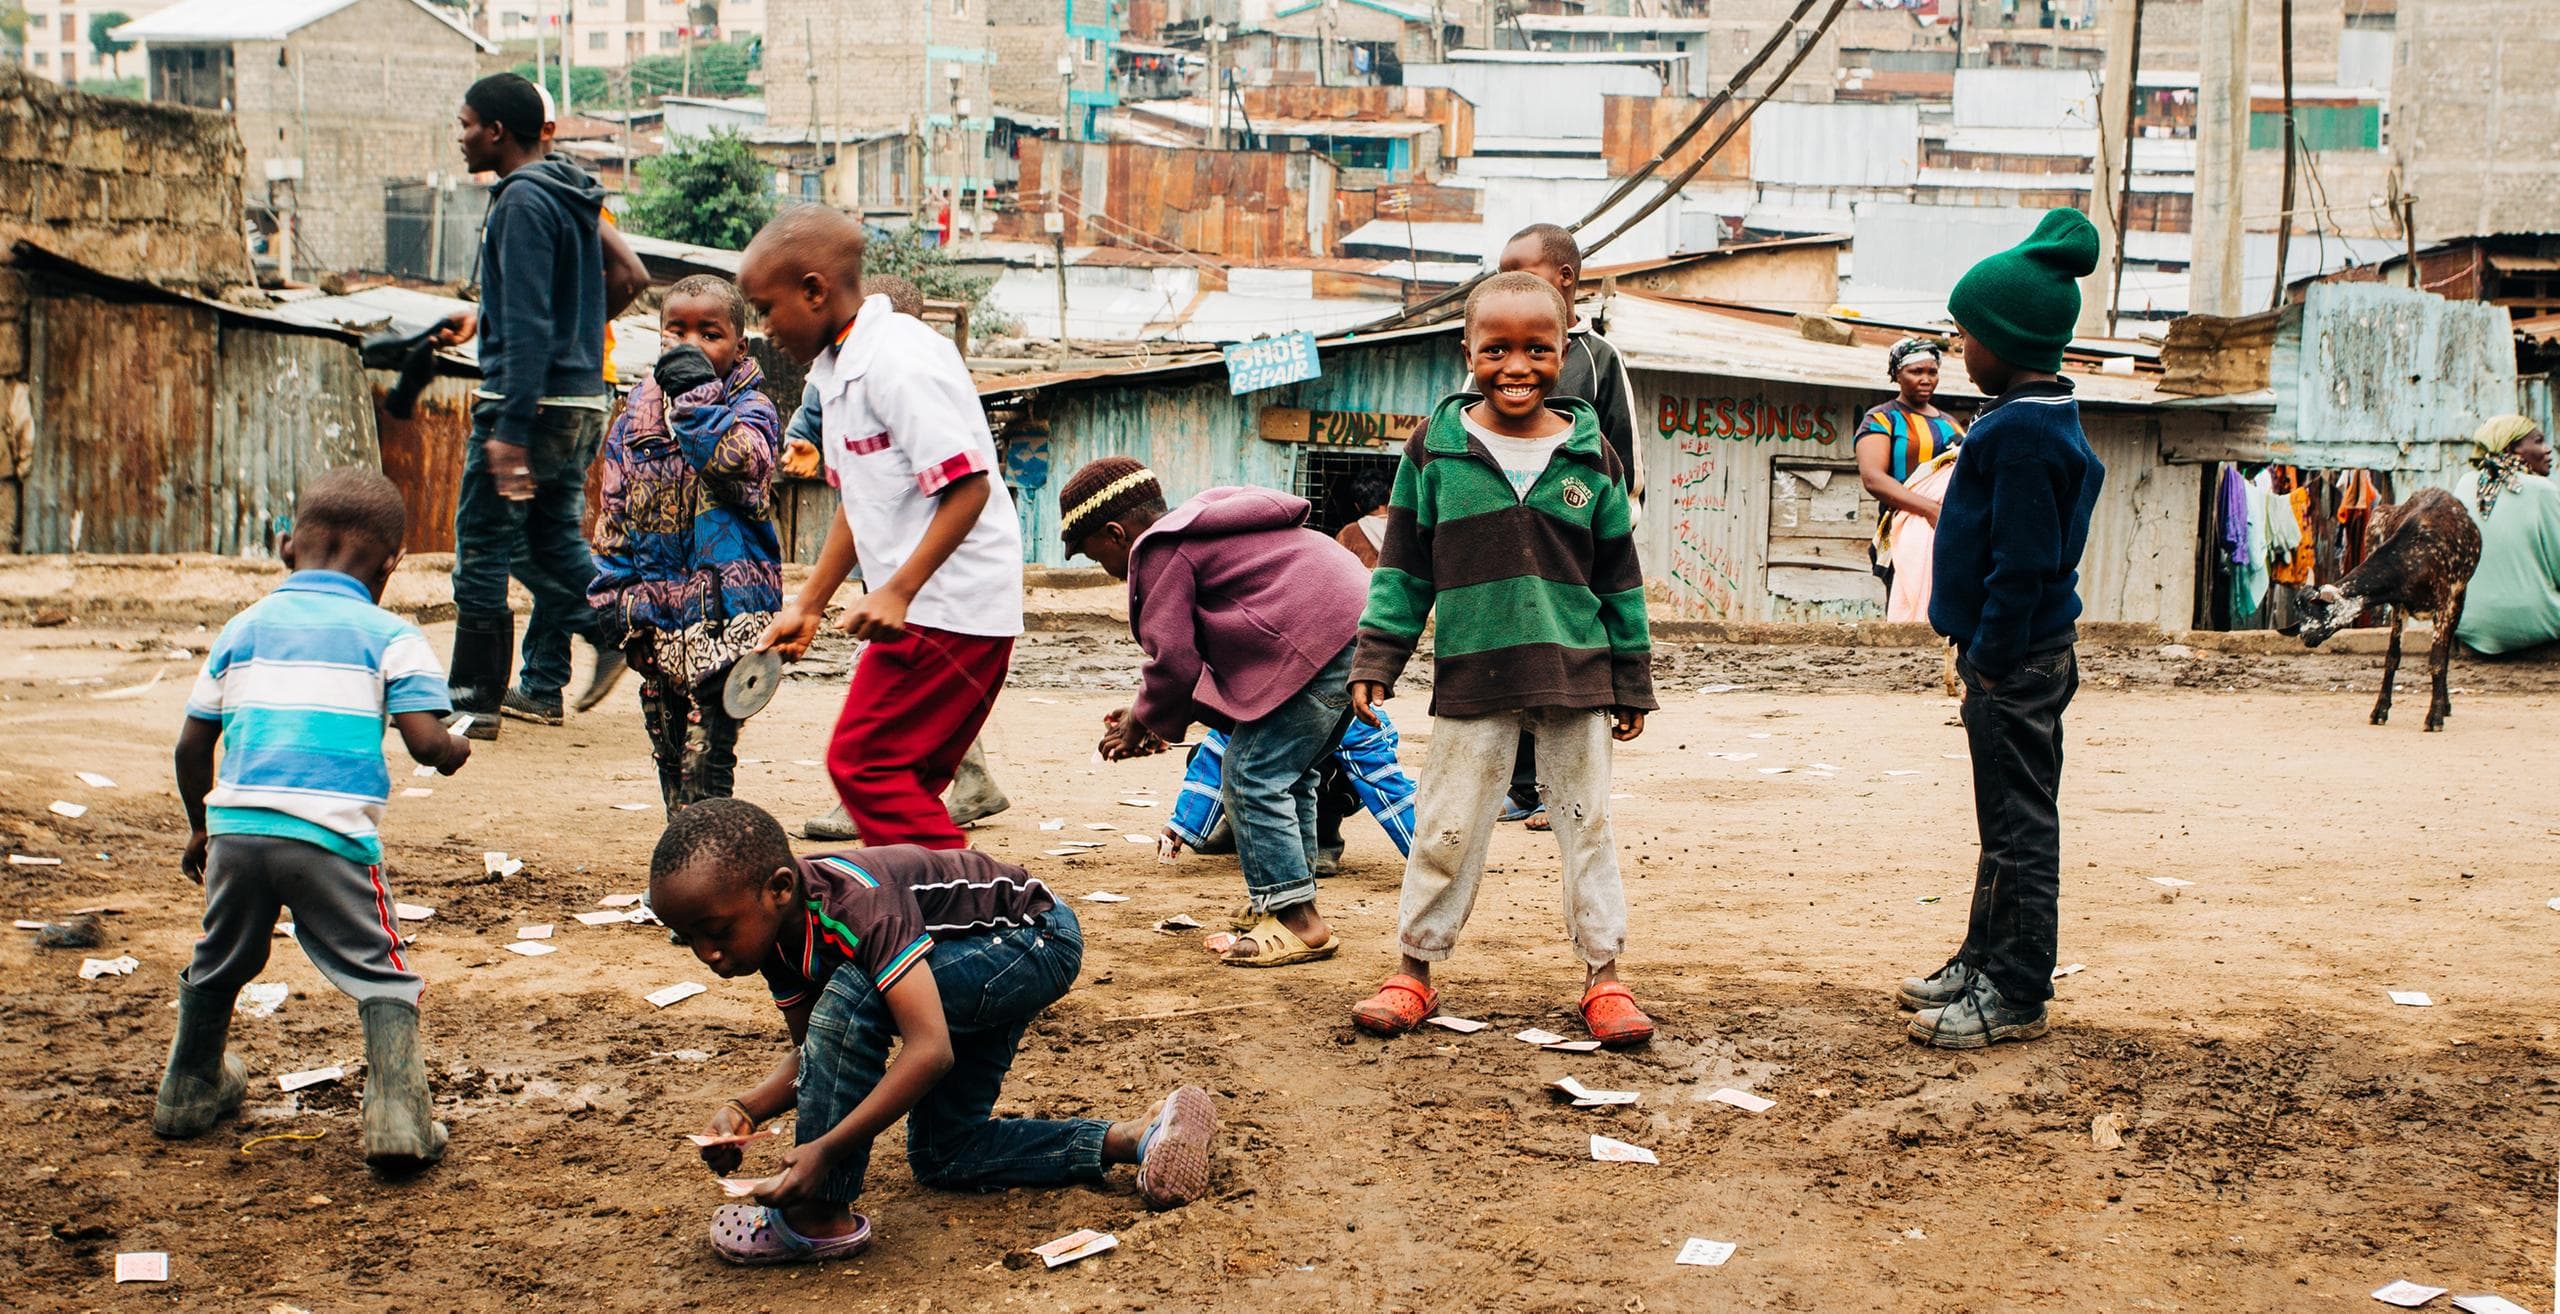 Group of boys playing in a poor township